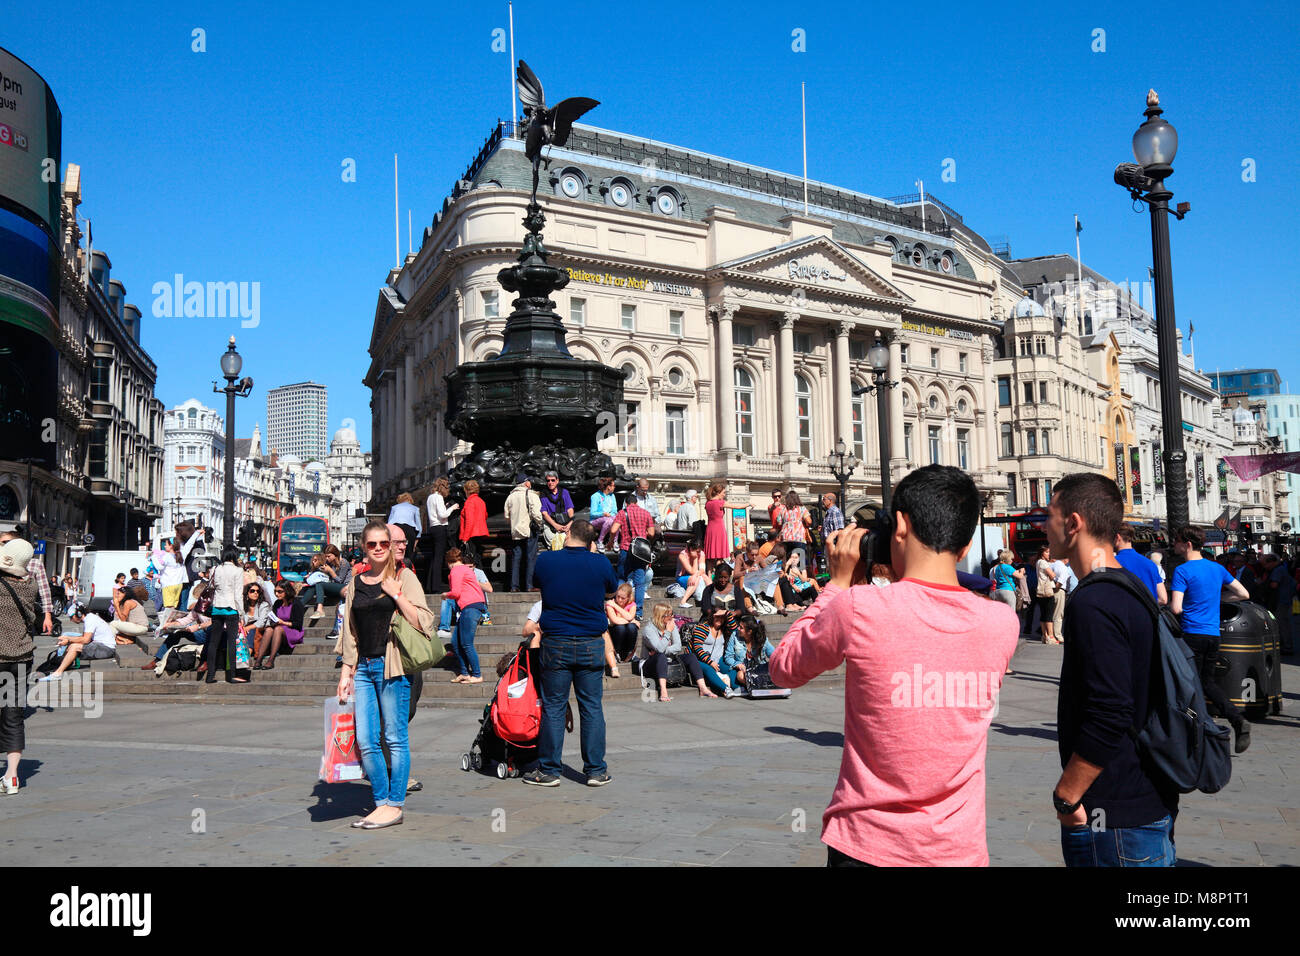 Statue of Eros at Piccadilly in London UK. Stock Photo